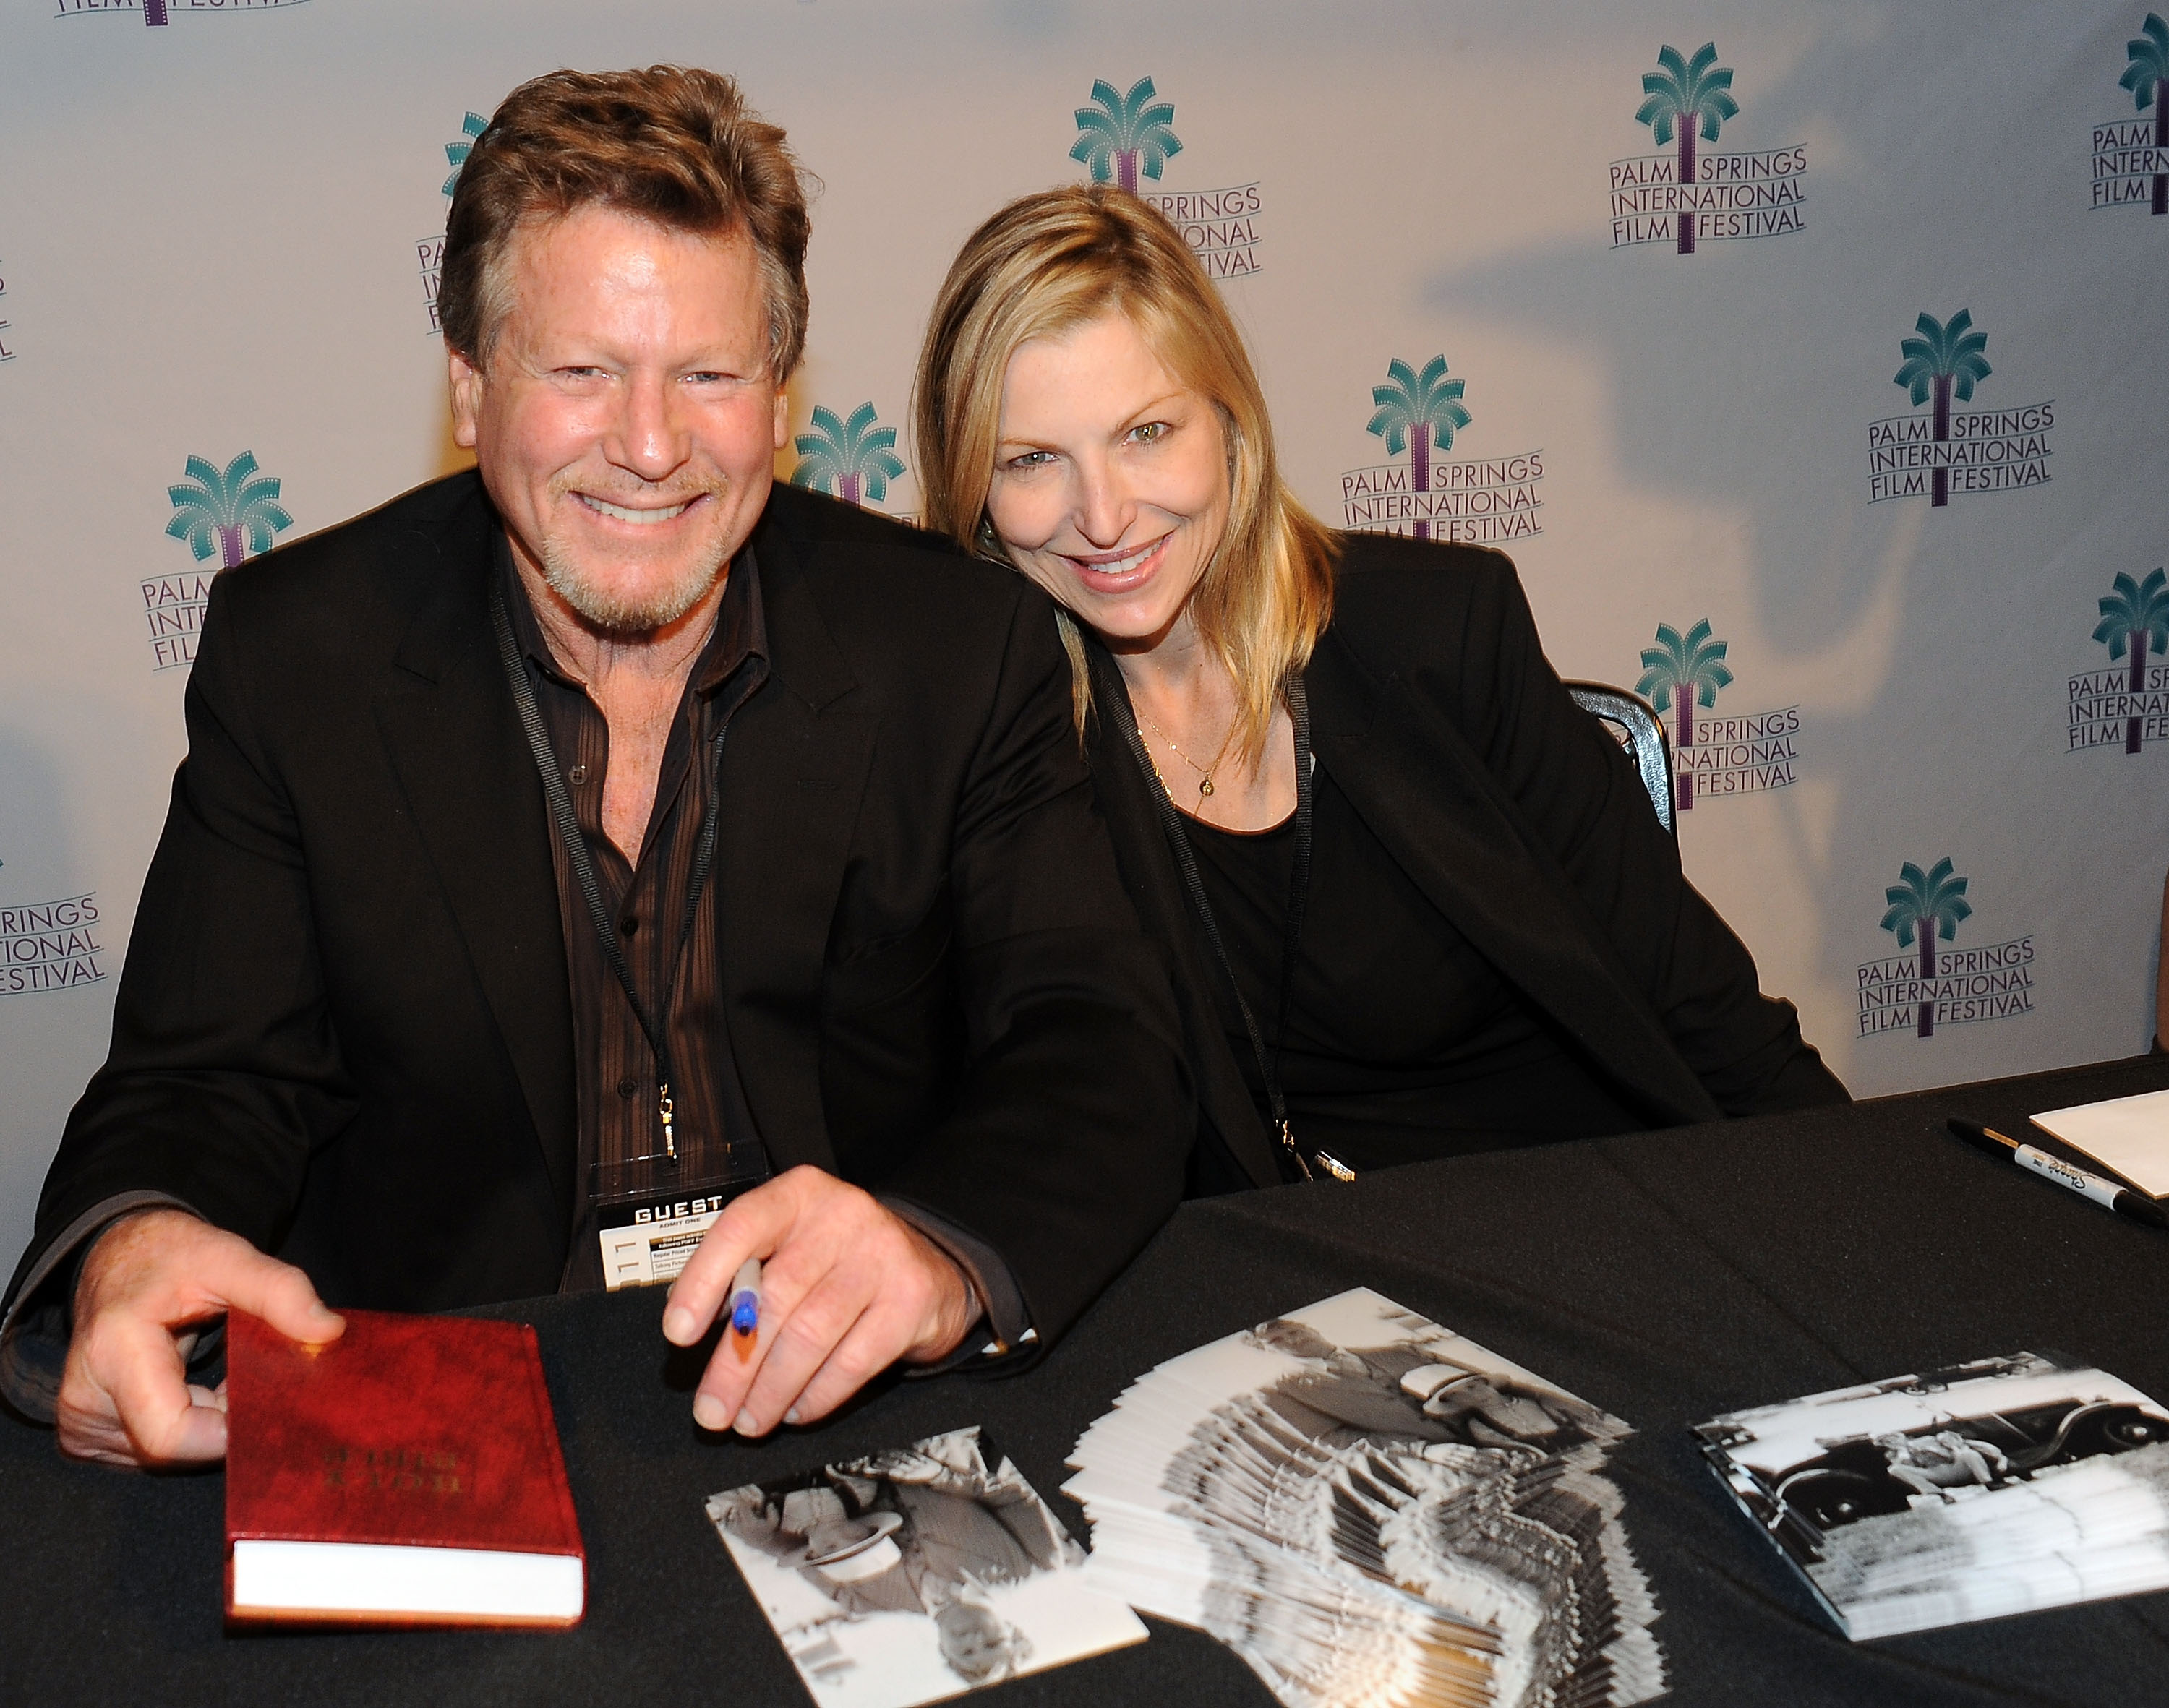 Ryan O'Neal and Tatum O'Neal at the "Paper Moon" Screening in California in 2011 | Source: Getty Images